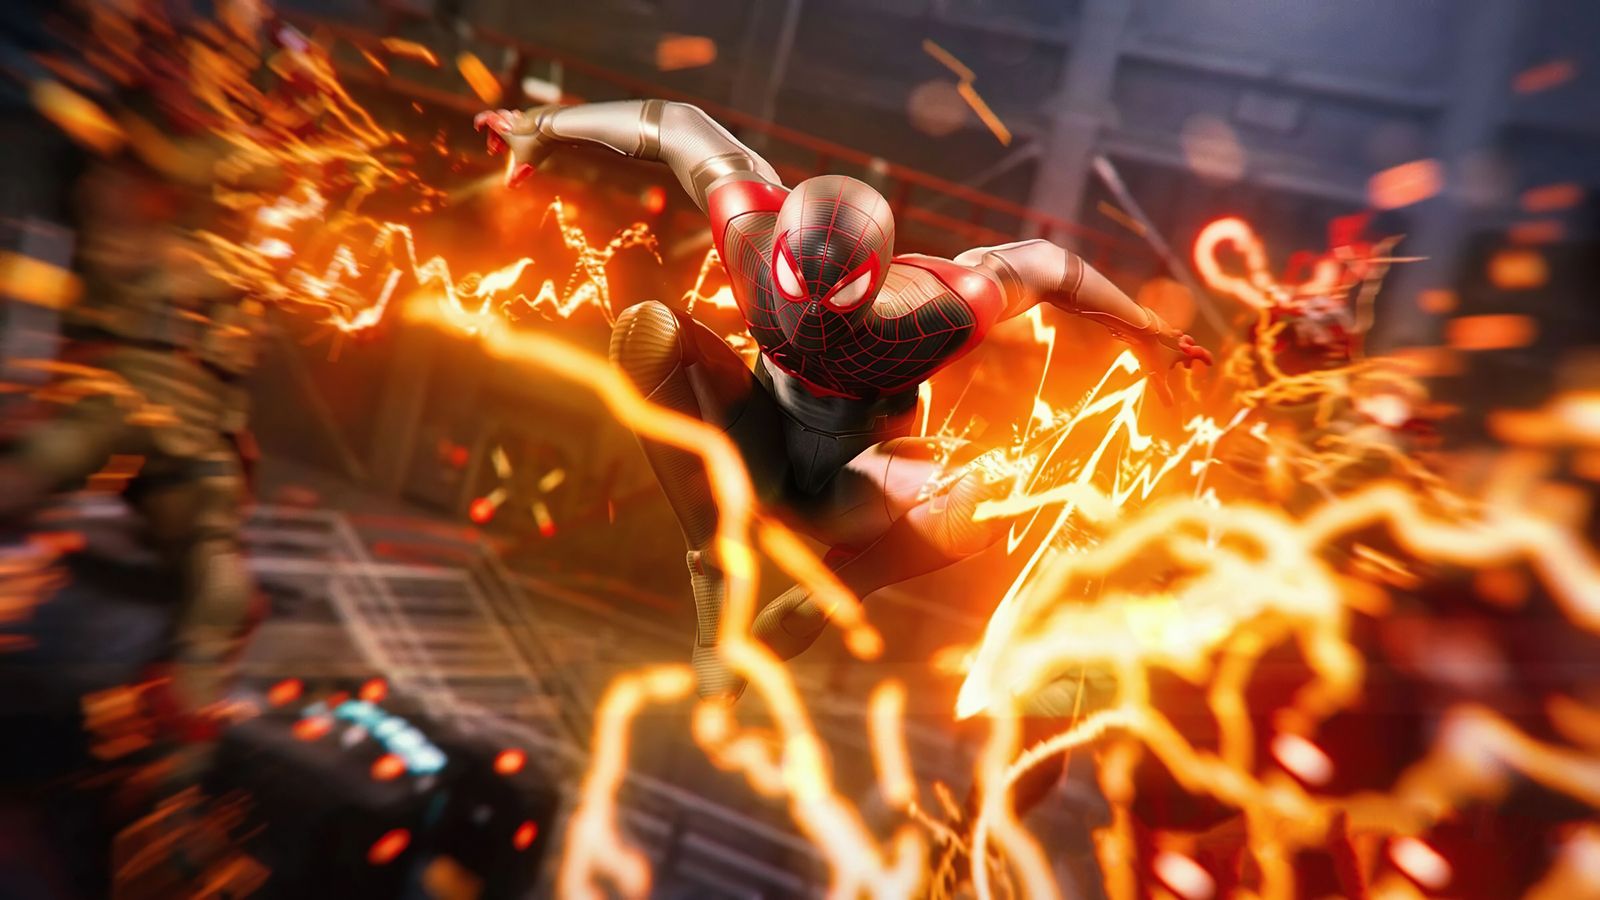 Dope Spiderman picture - Wallpaper Cave